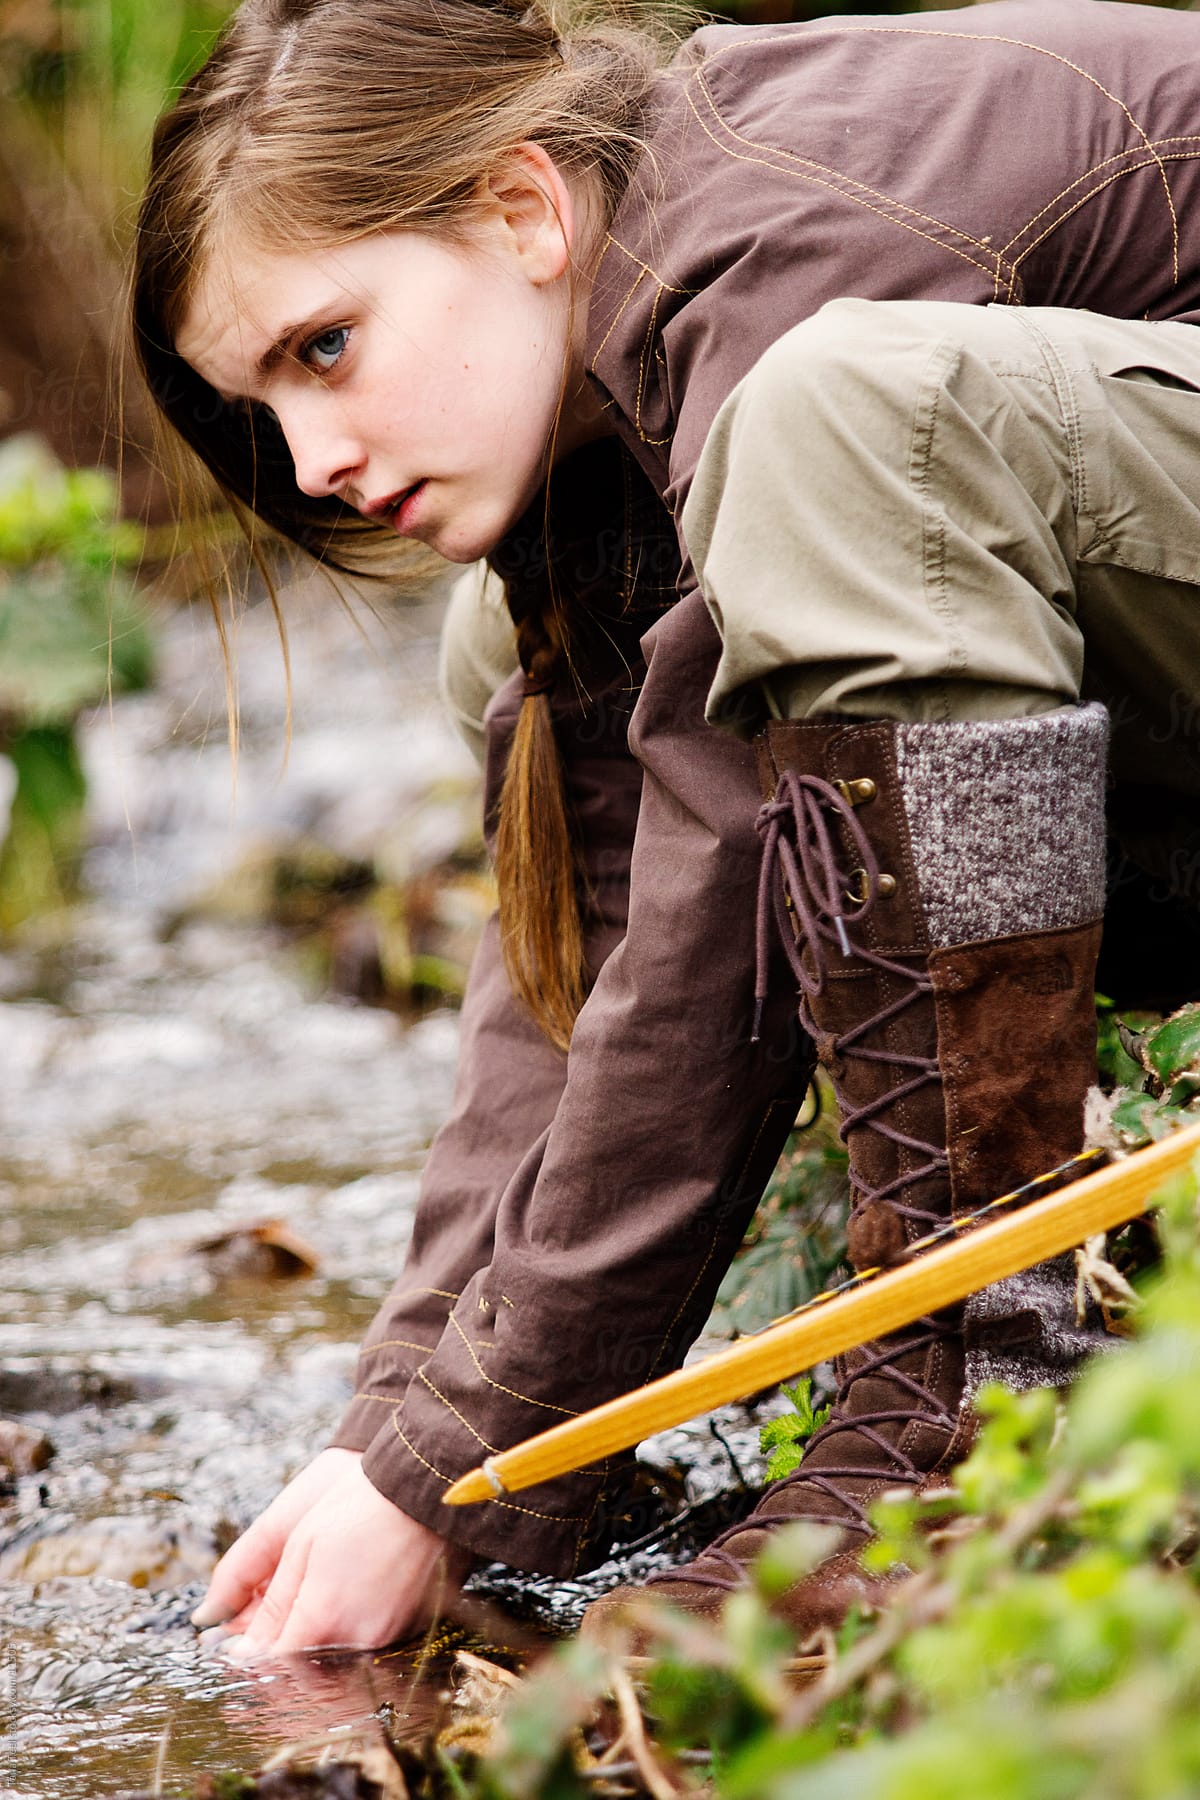 Young girl stopping to get water from a stream with her hands.